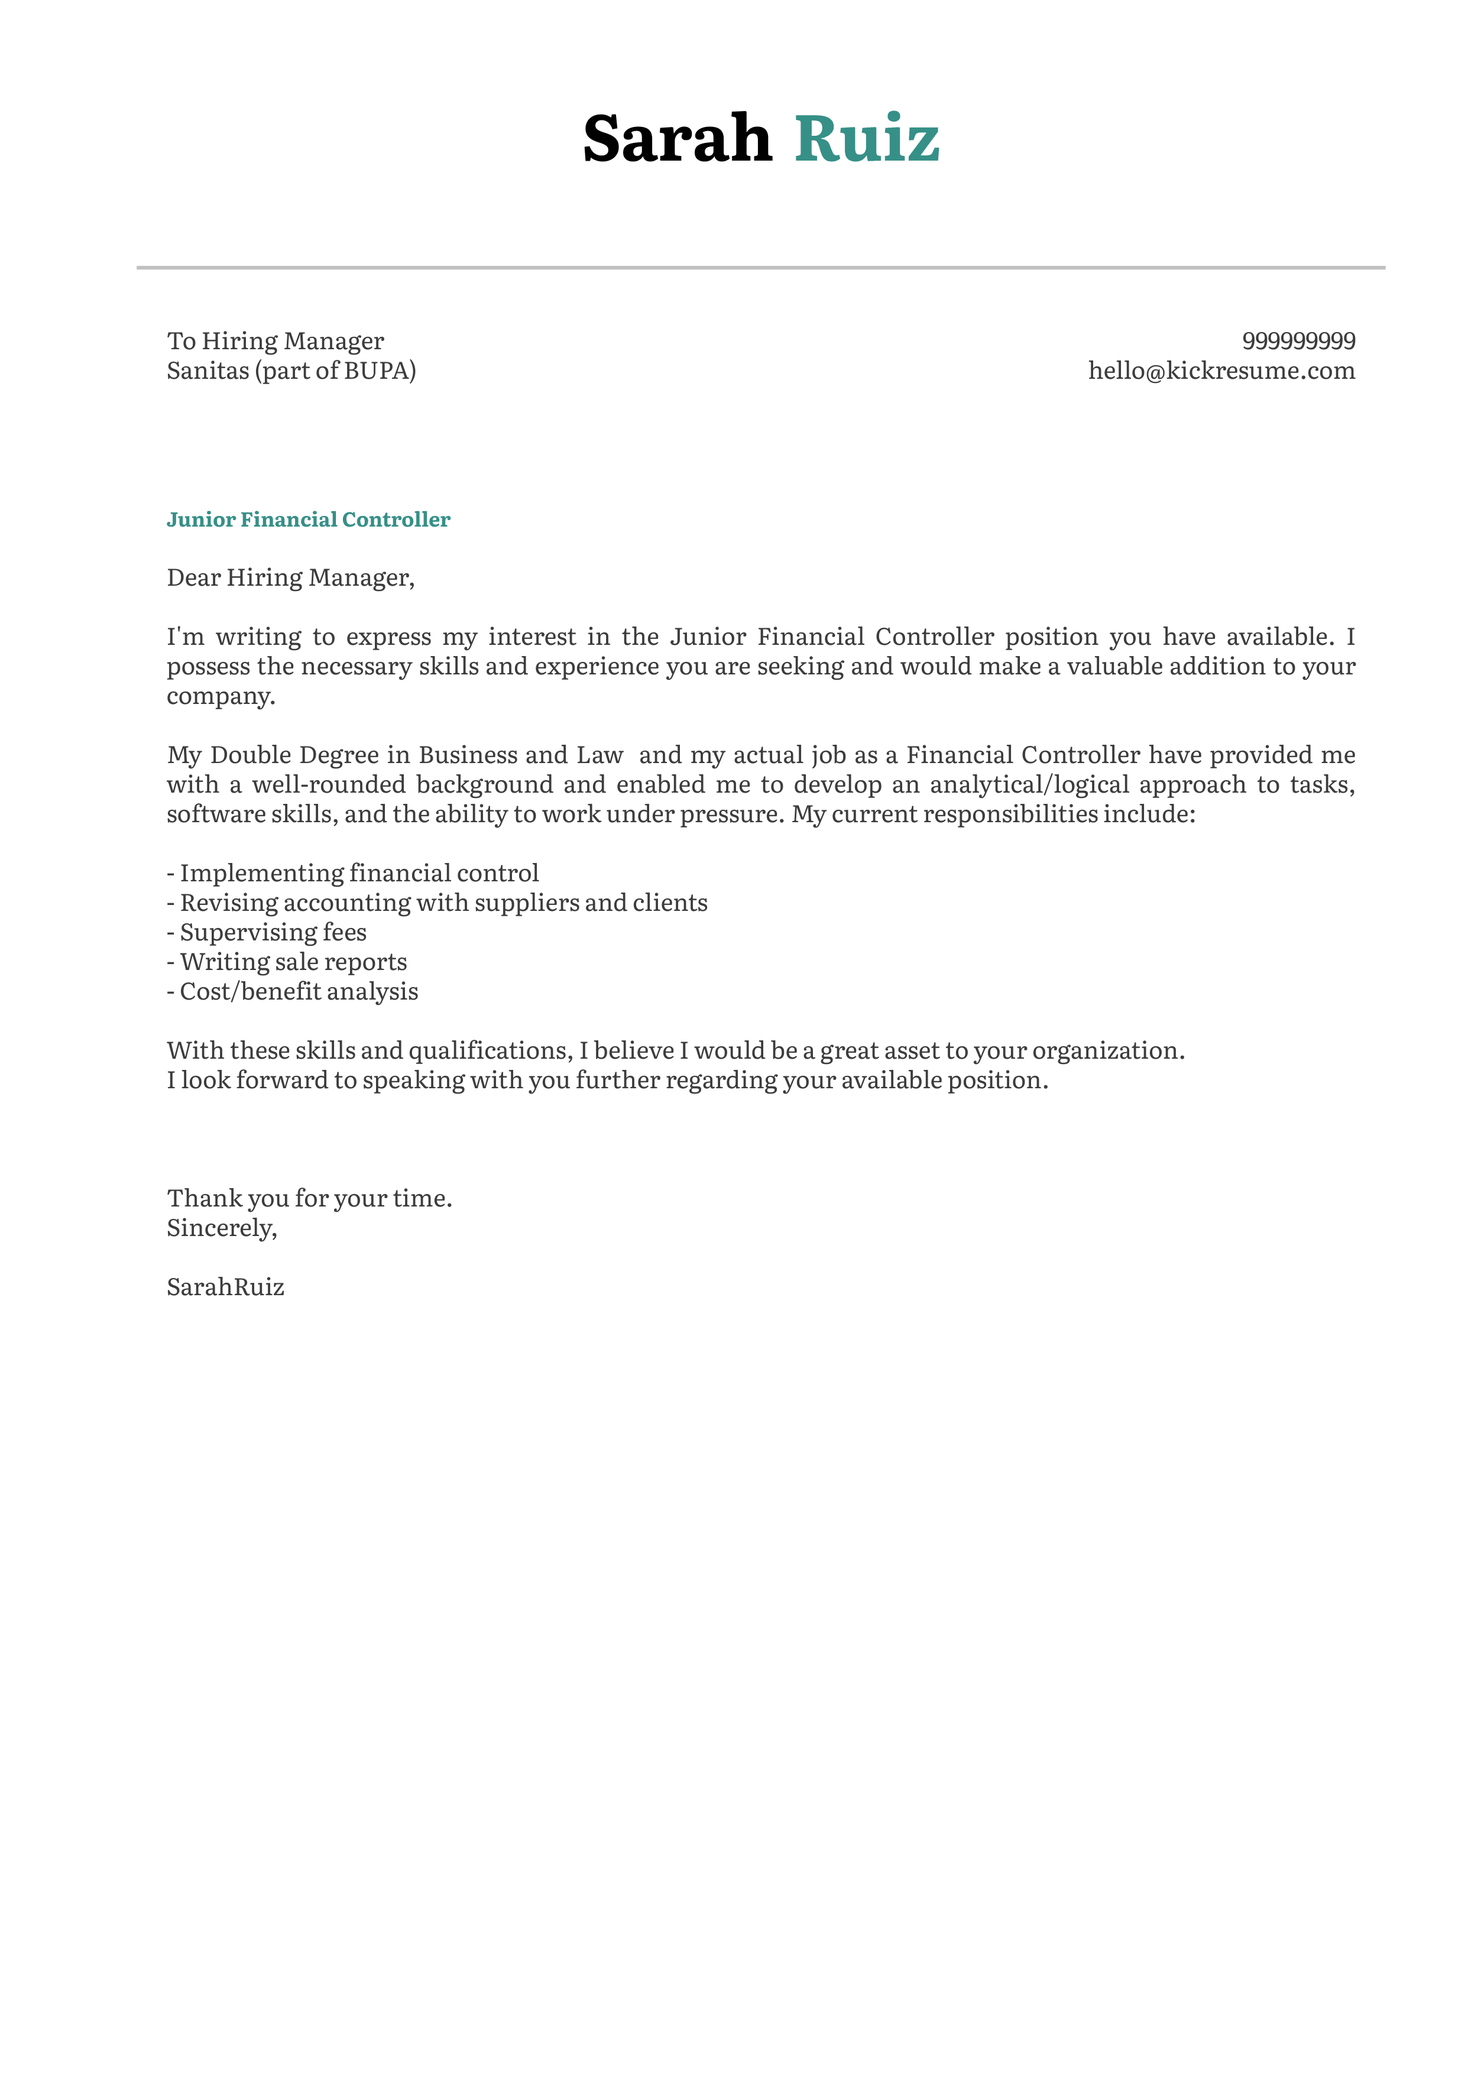 DSP Engineer Cover Letter Template